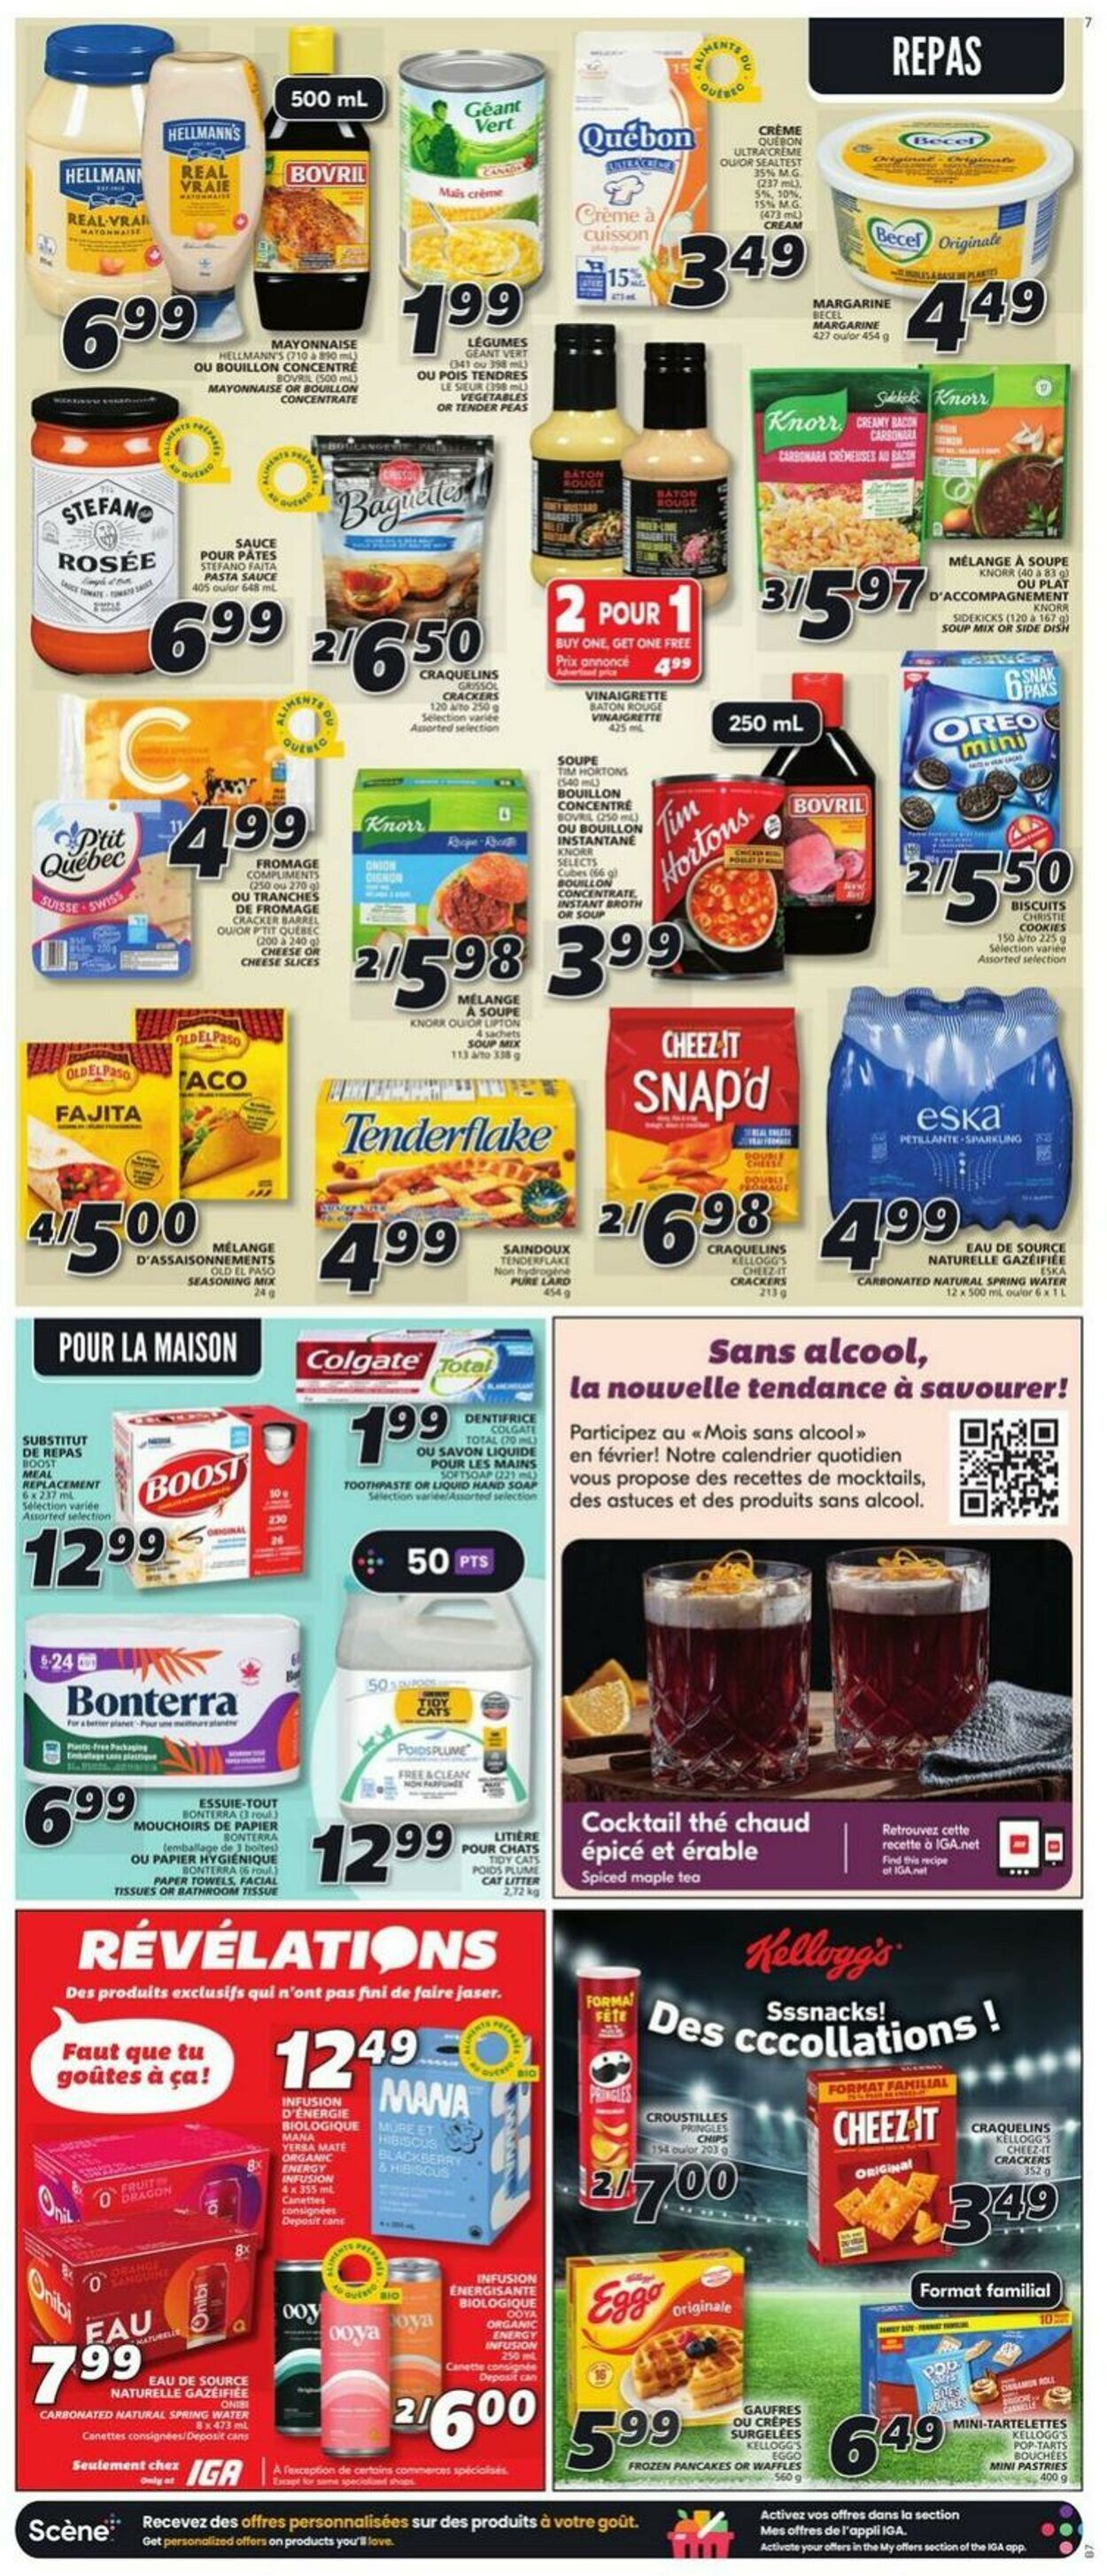 IGA Flyer from 02/01/2024